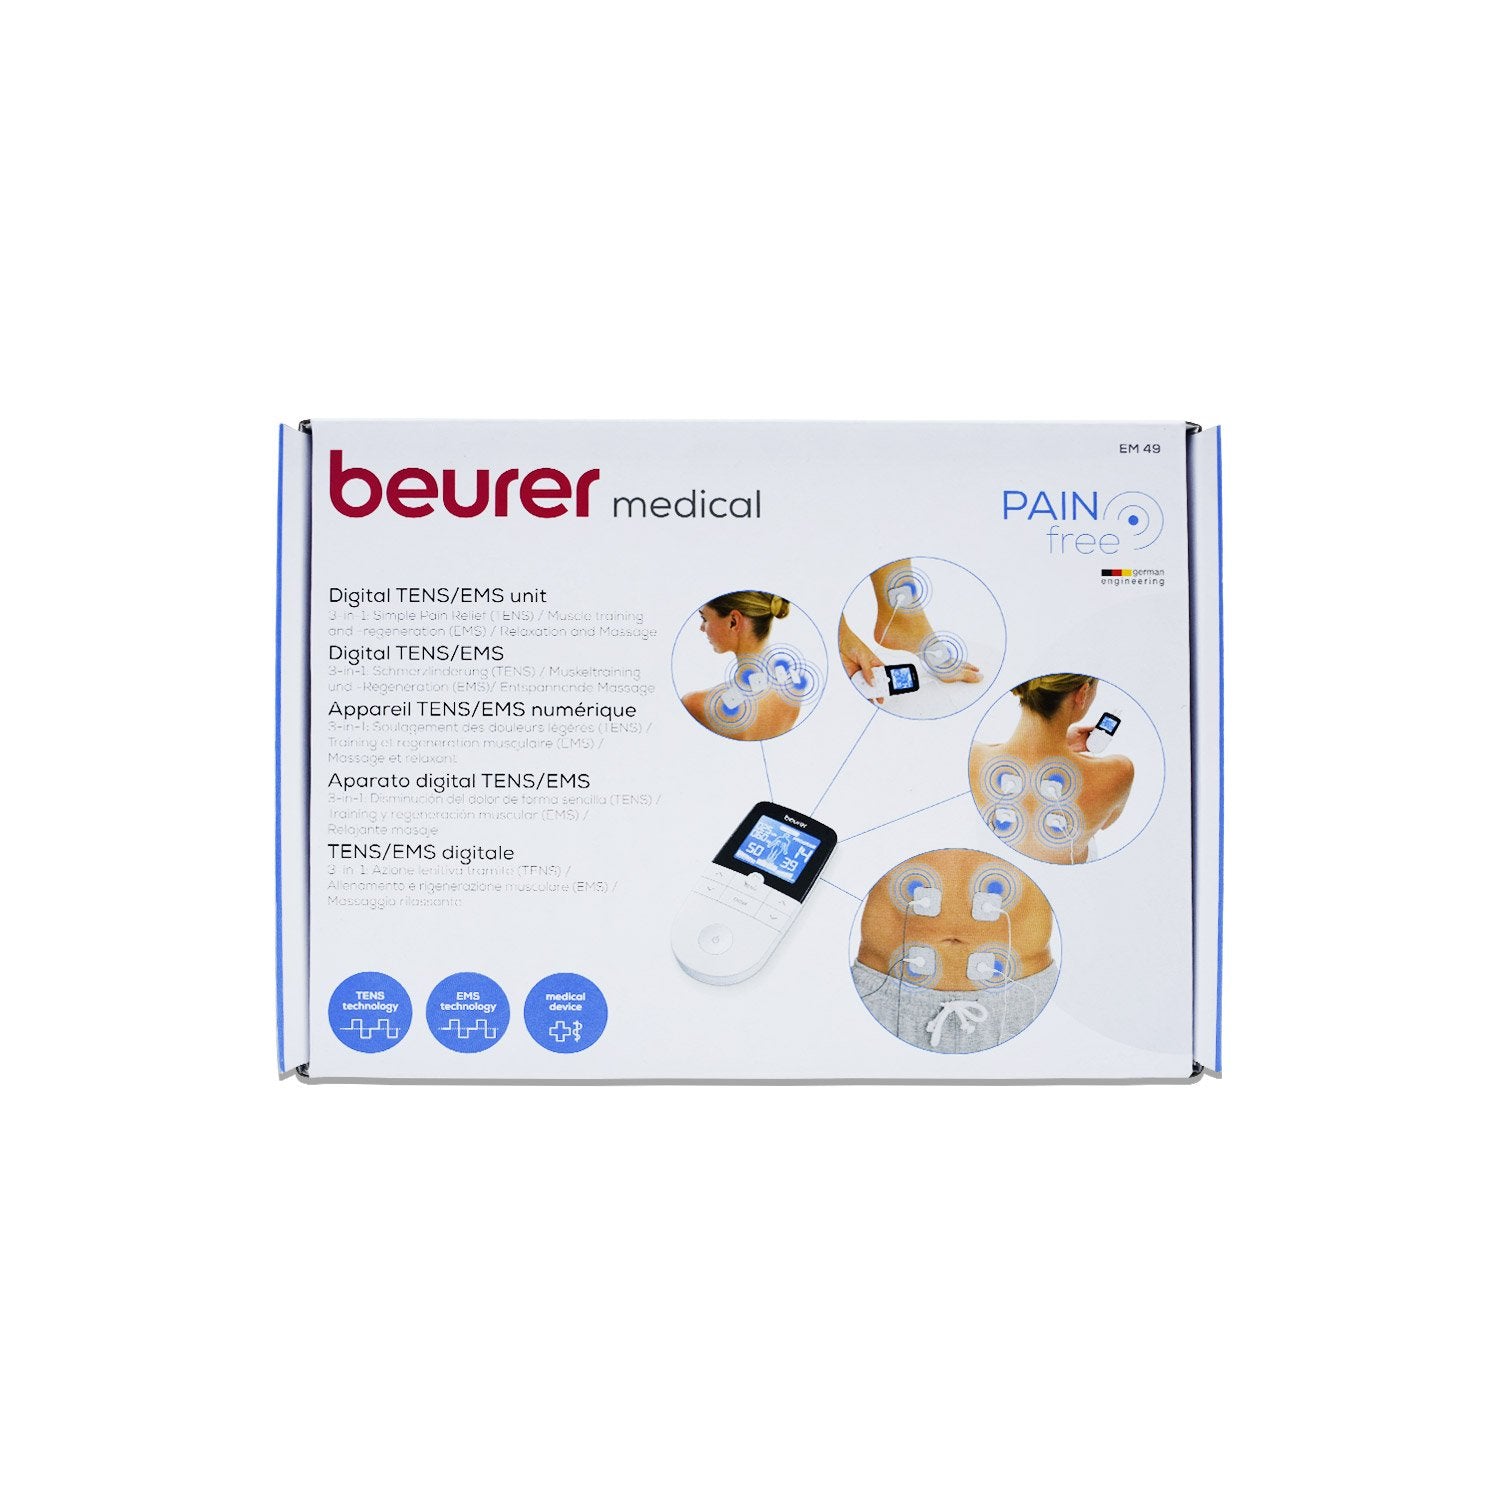 Beurer Pain Relief Products With Reliable German Technology (Digital Tens  Ems Em49), White